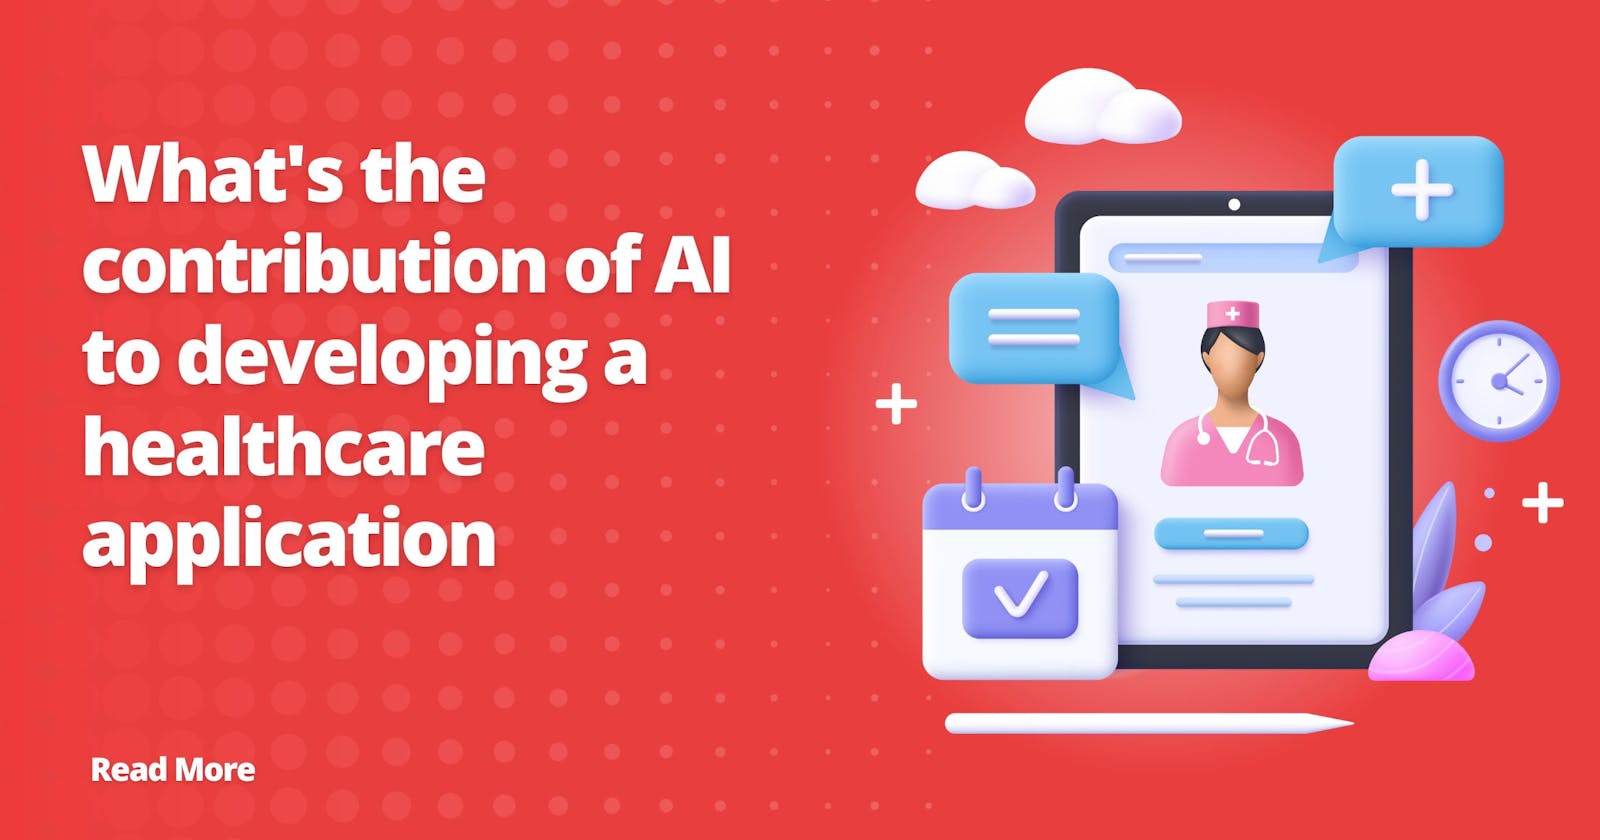 What's the contribution of AI to developing a healthcare application